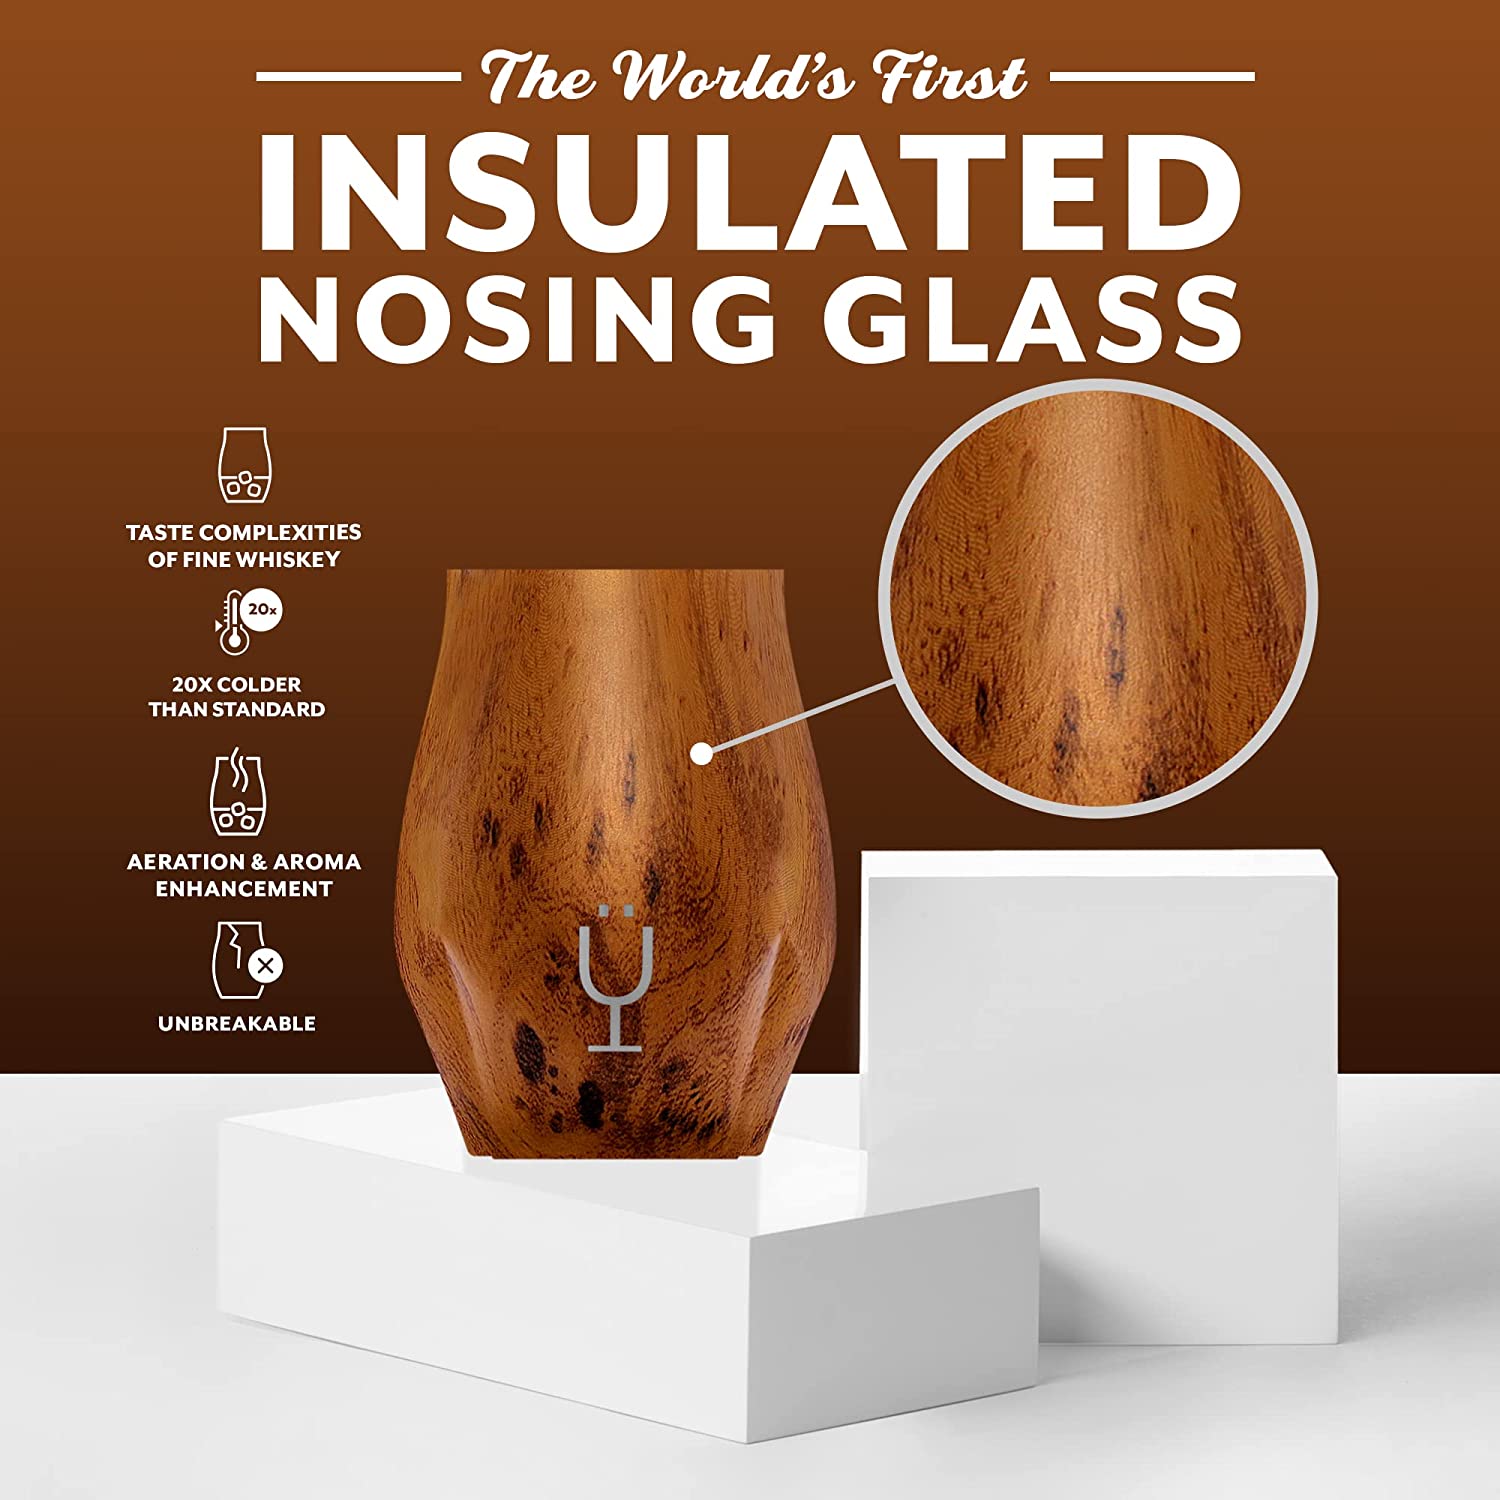 A brown whiskey nosing glass. There is text which reads, "The world's first insulated nosing glass."